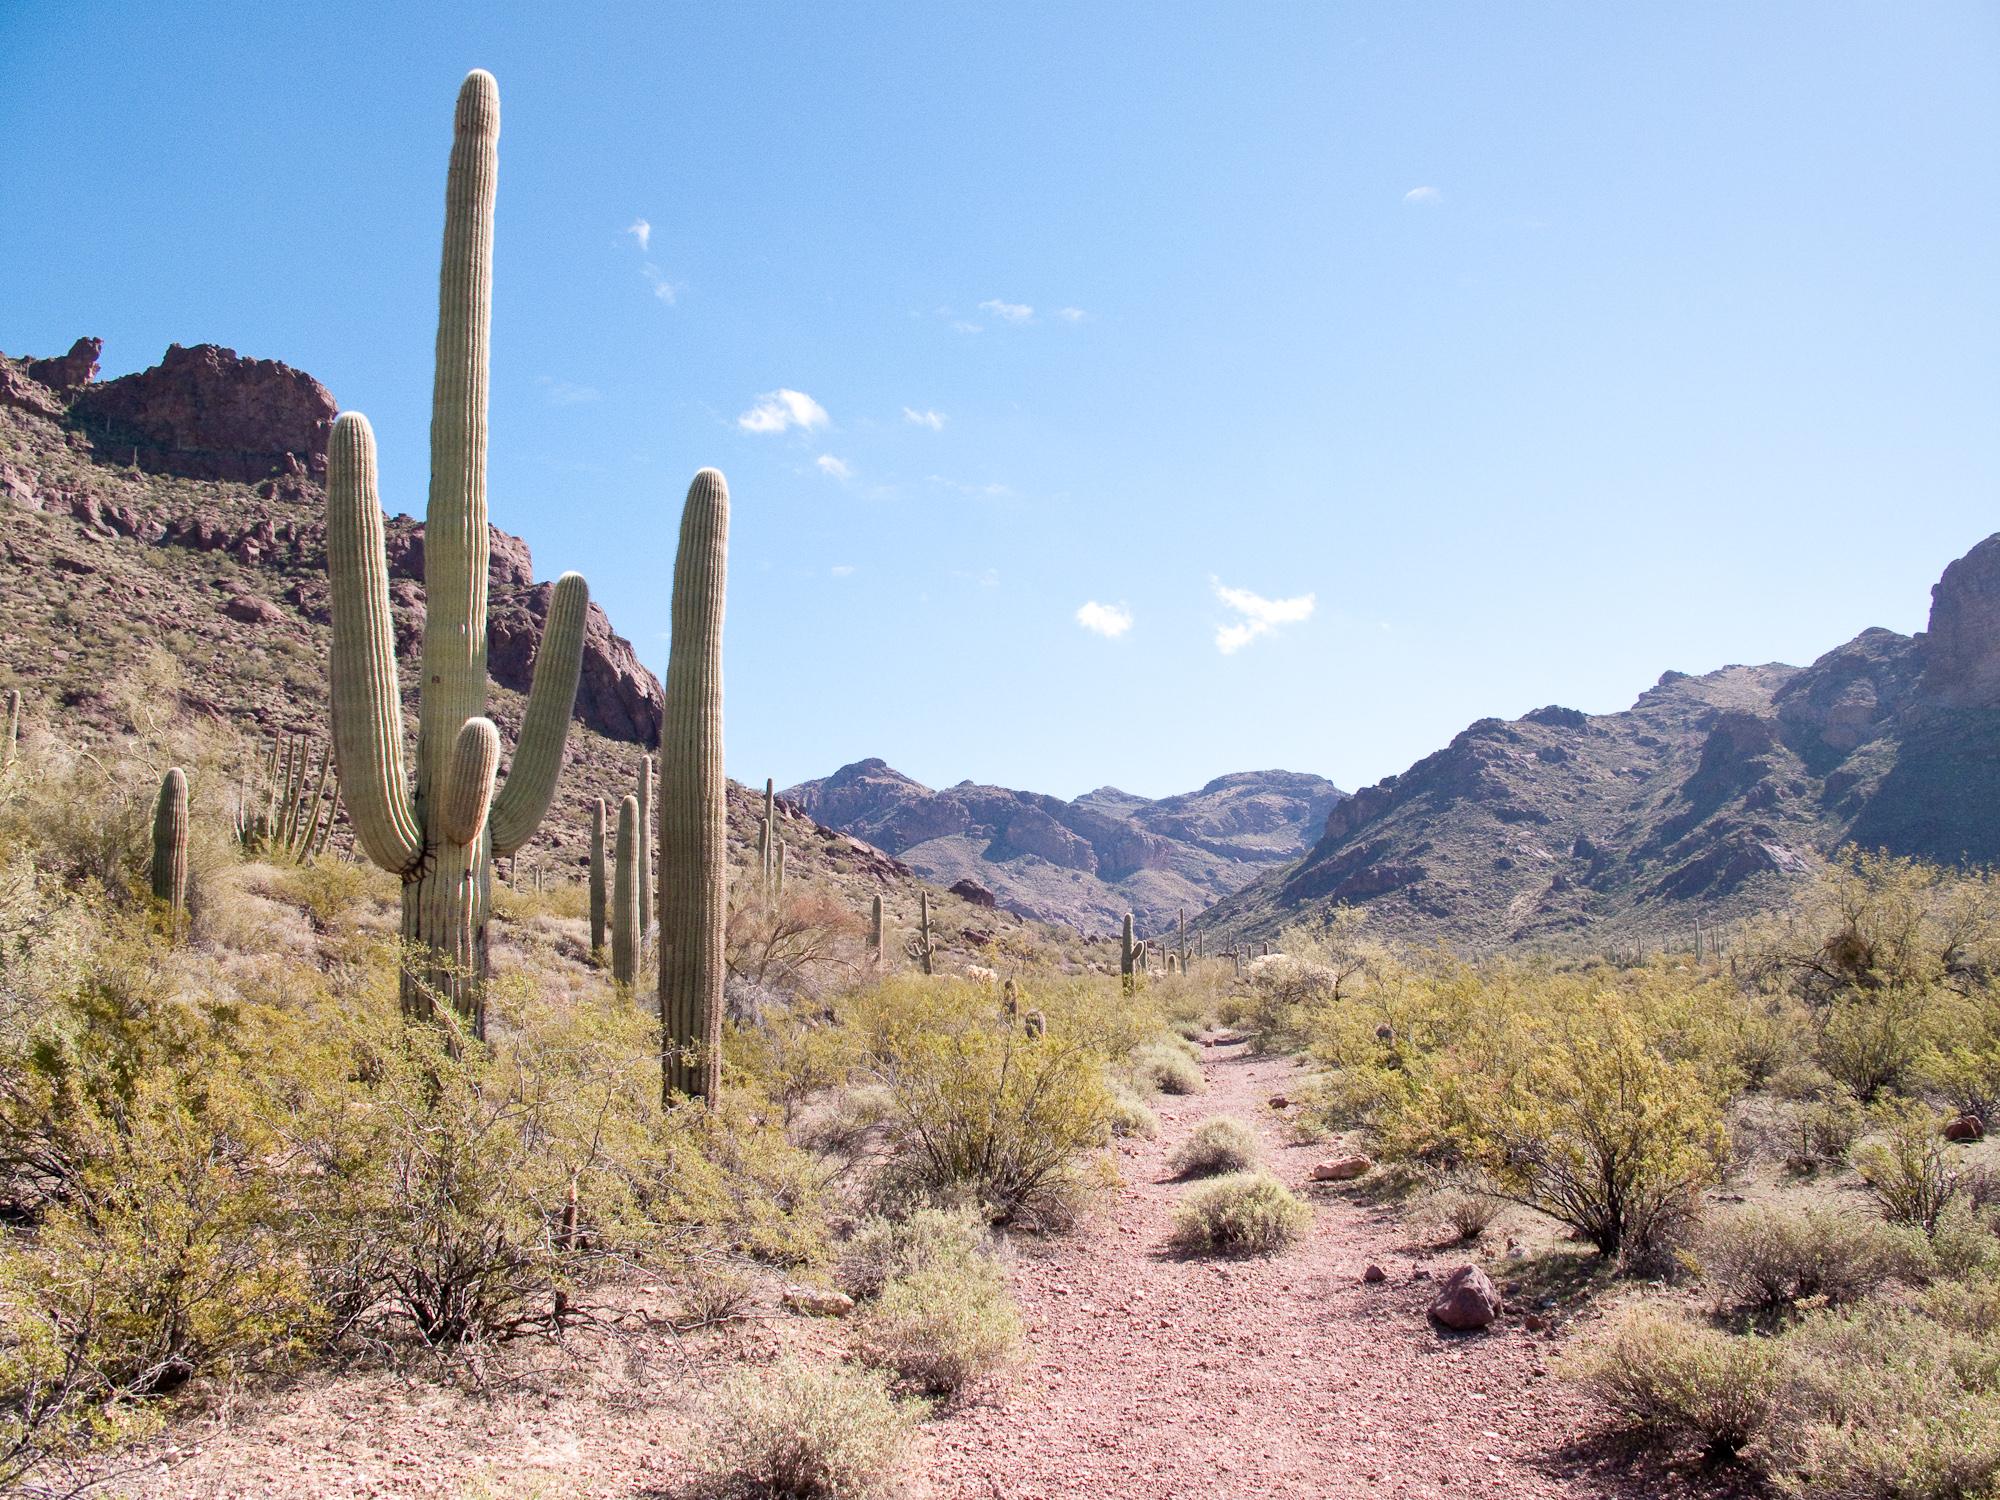 View of Alamo Canyon trail, flanked by saguaros and vegetation with mountains in background